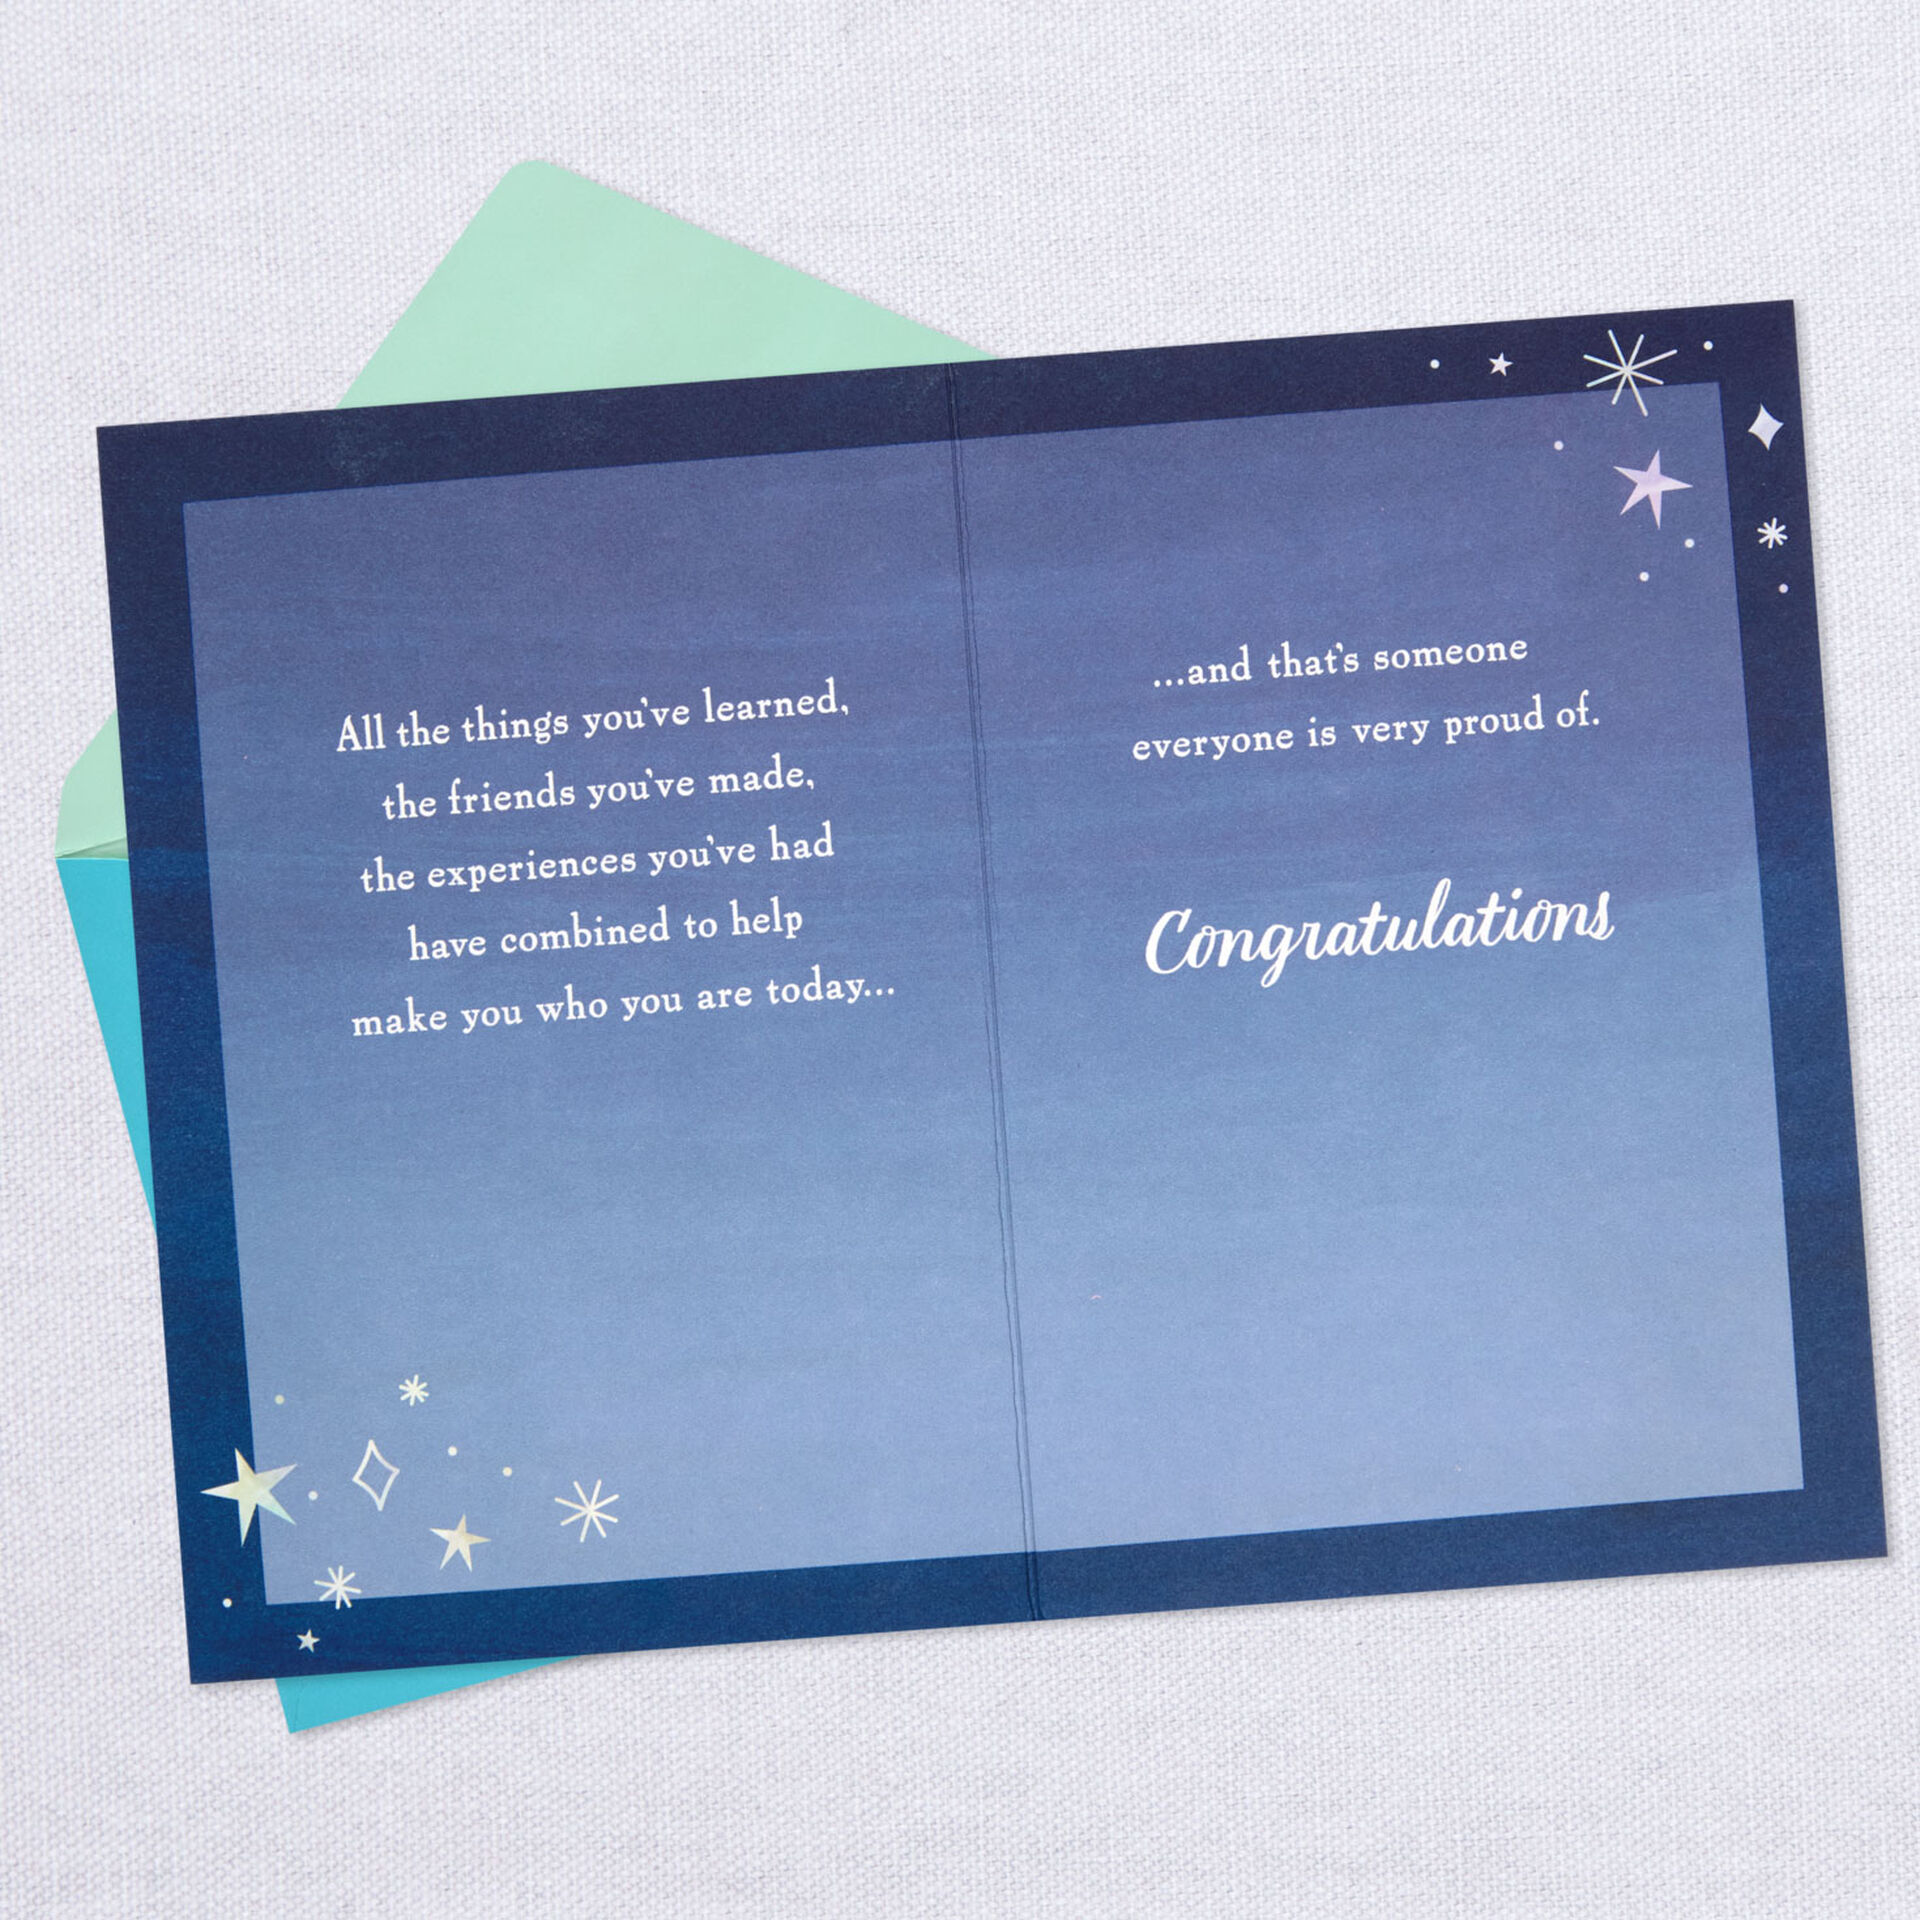 Mortarboard-Caps-and-Stars-Graduation-Card_359GR6355_03